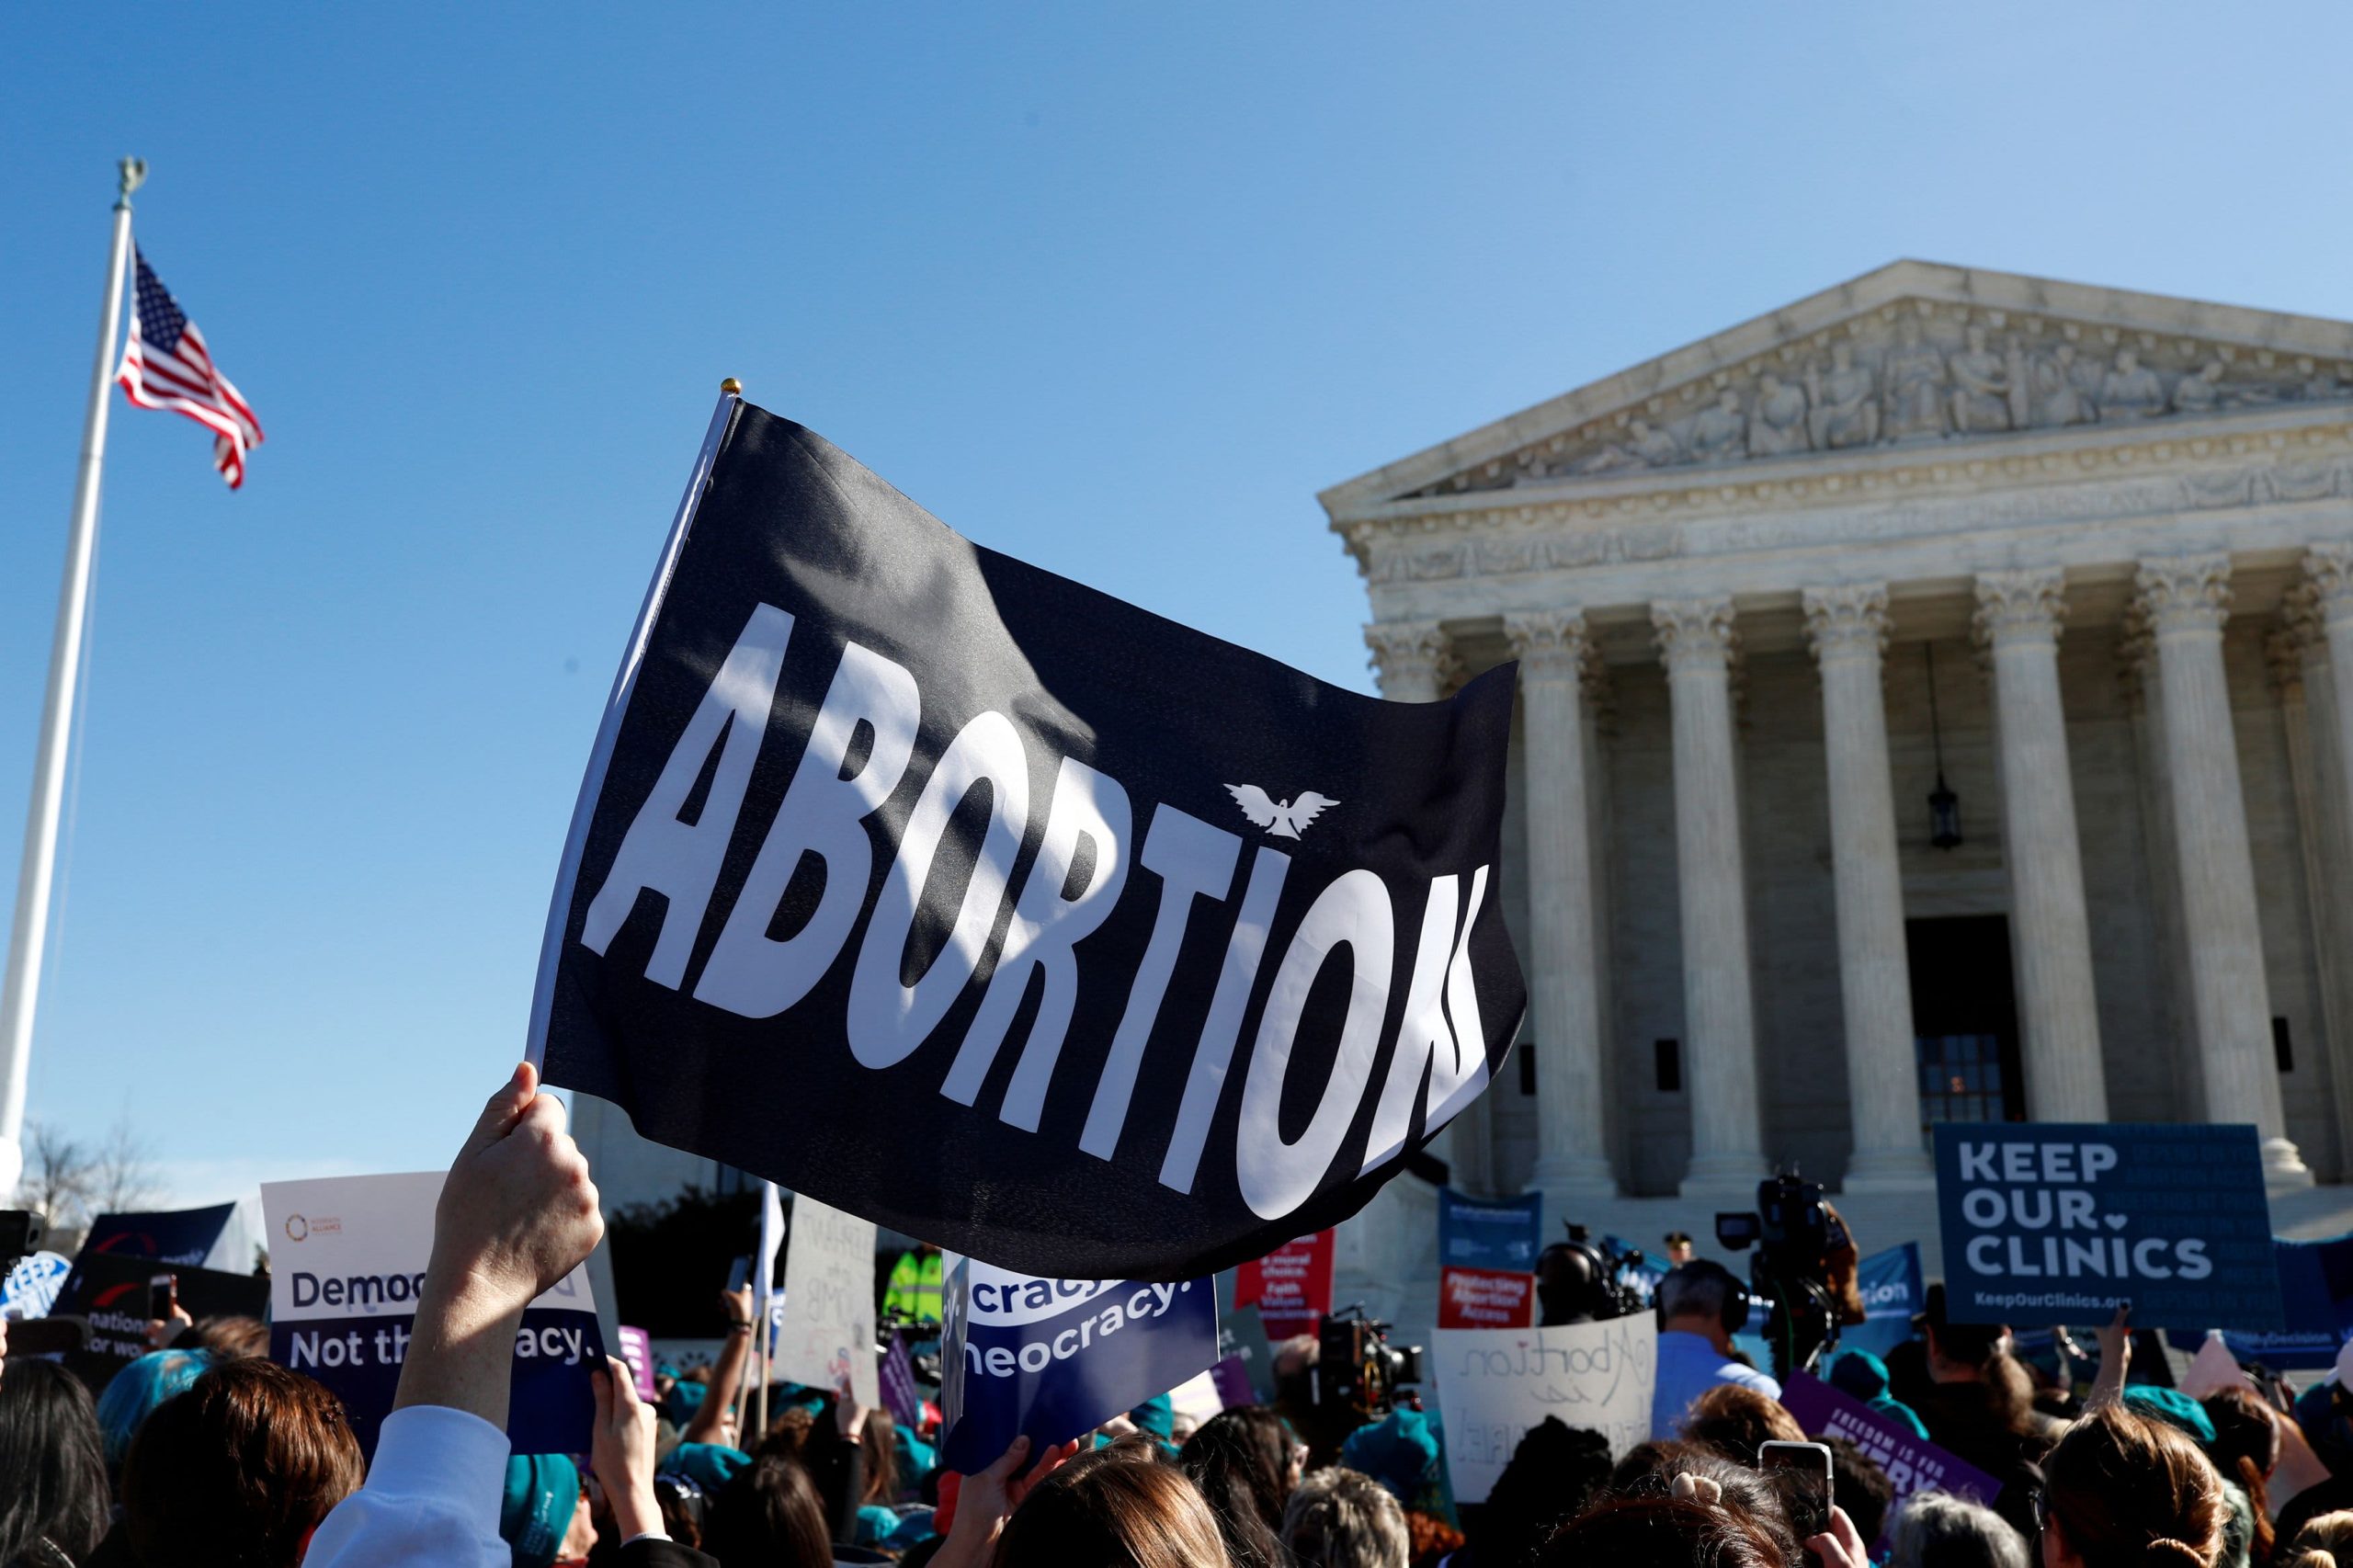 Supreme Court Set to Hear Major Abortion Case: Implications for Reproductive Health Care Across the Nation